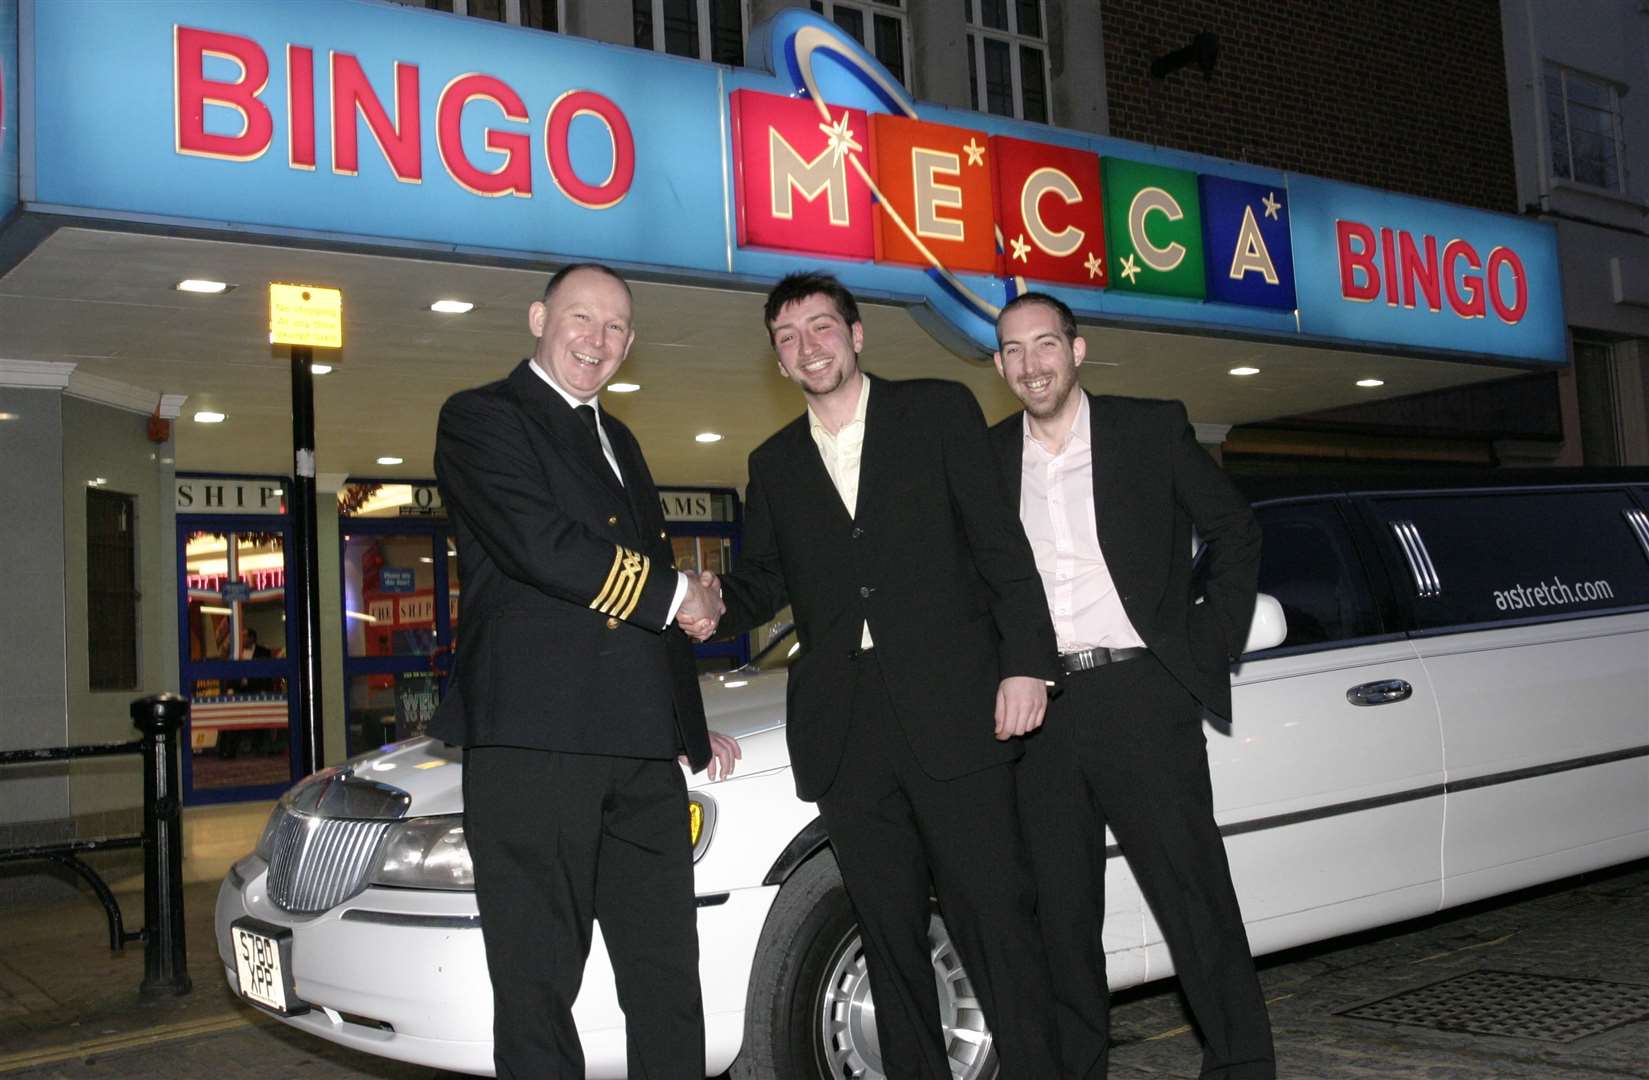 Competition winner Rod Dale and friend John Reeve arrive at the bingo hall in a limo in 2005